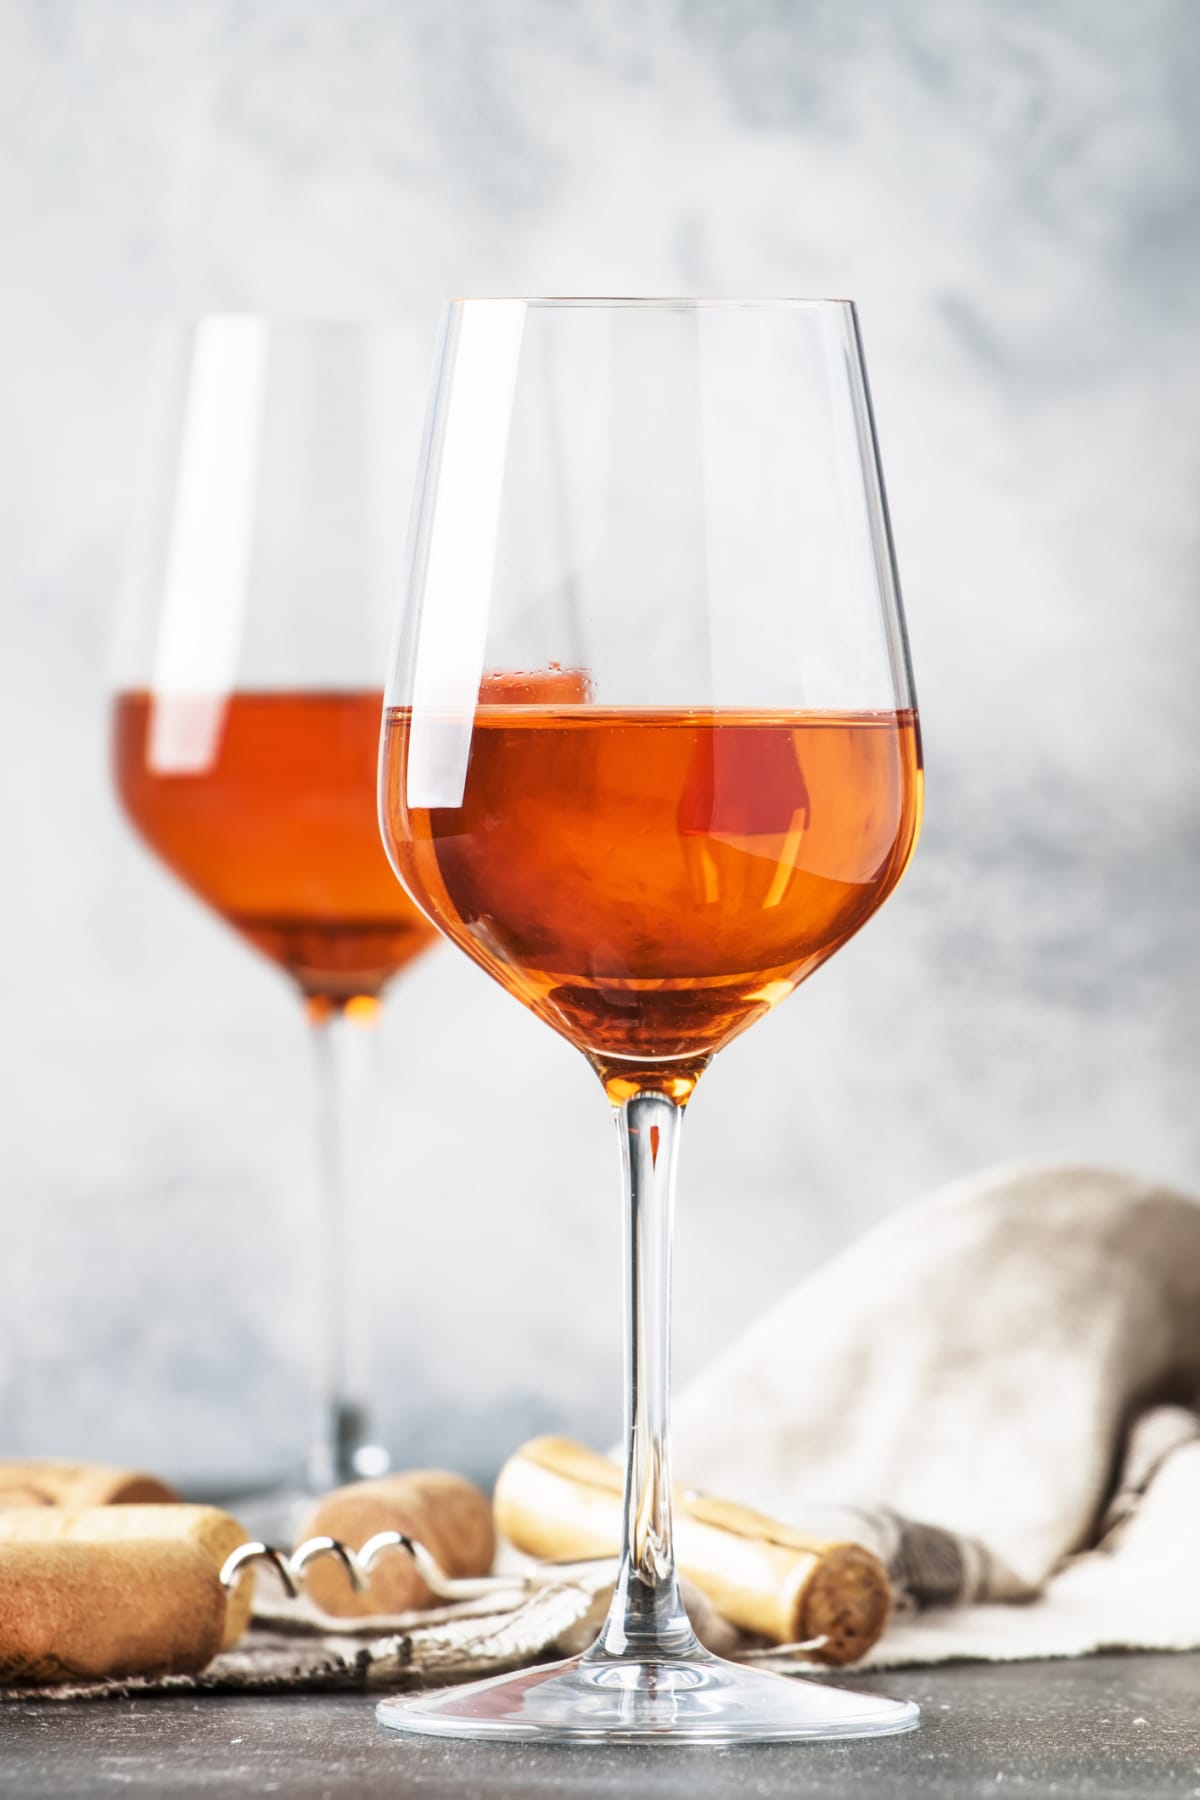 Trendy food and drink, orange wine in glass, gray table, space for text, selective focus